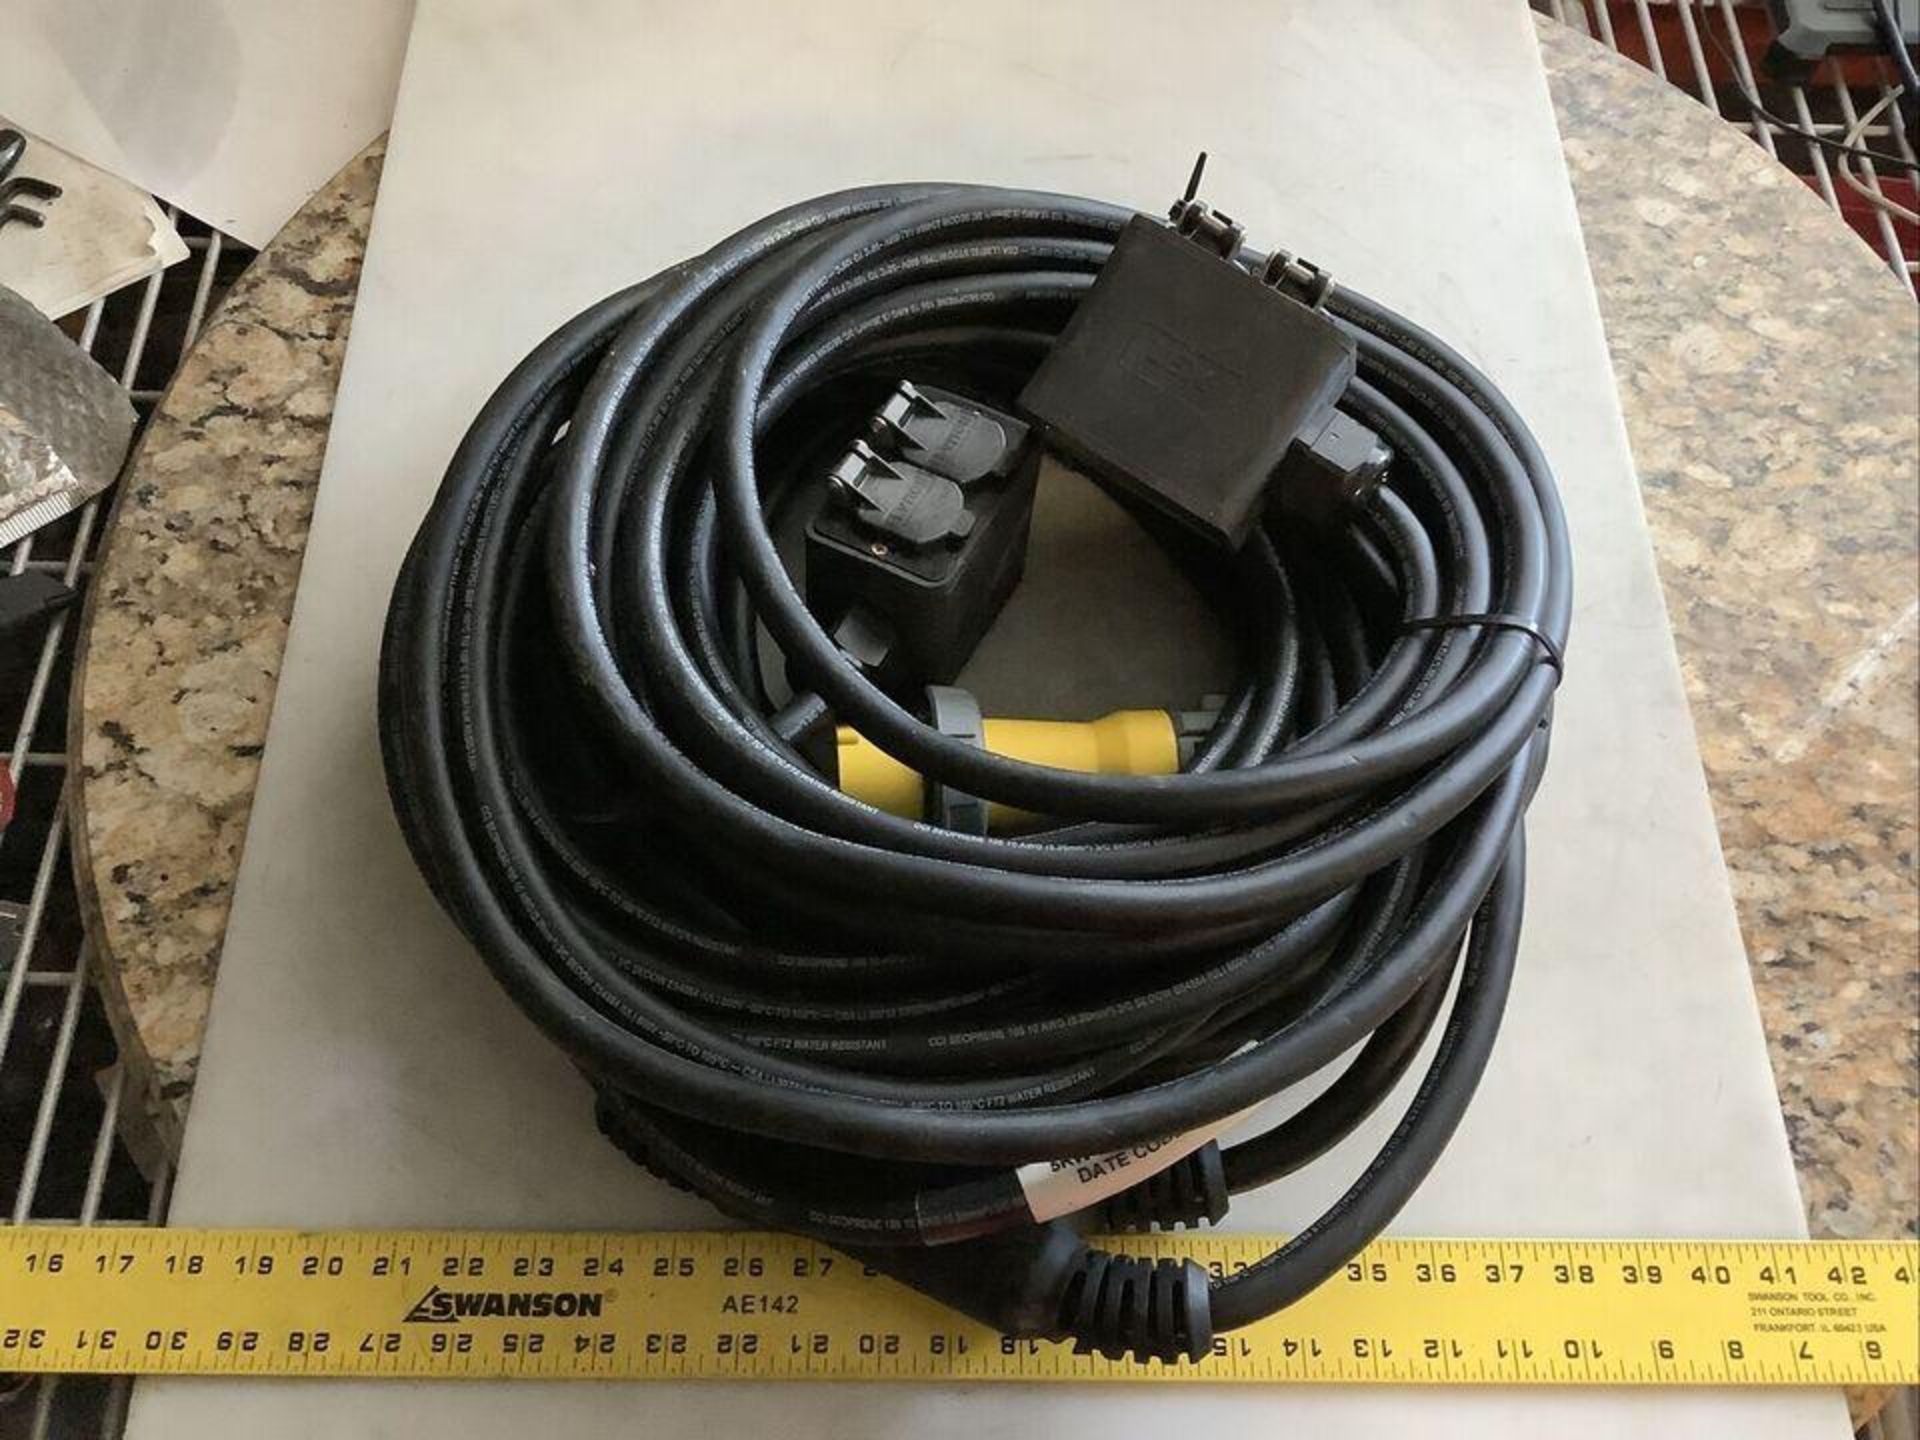 ...( 34 ) LEX 6150-01-530-7352 DB20QD50SEPS 2 Pole, 3 Wire, 20A 120V OUTDOOR CORD 50' IRP ( 18 ).... - Image 16 of 22